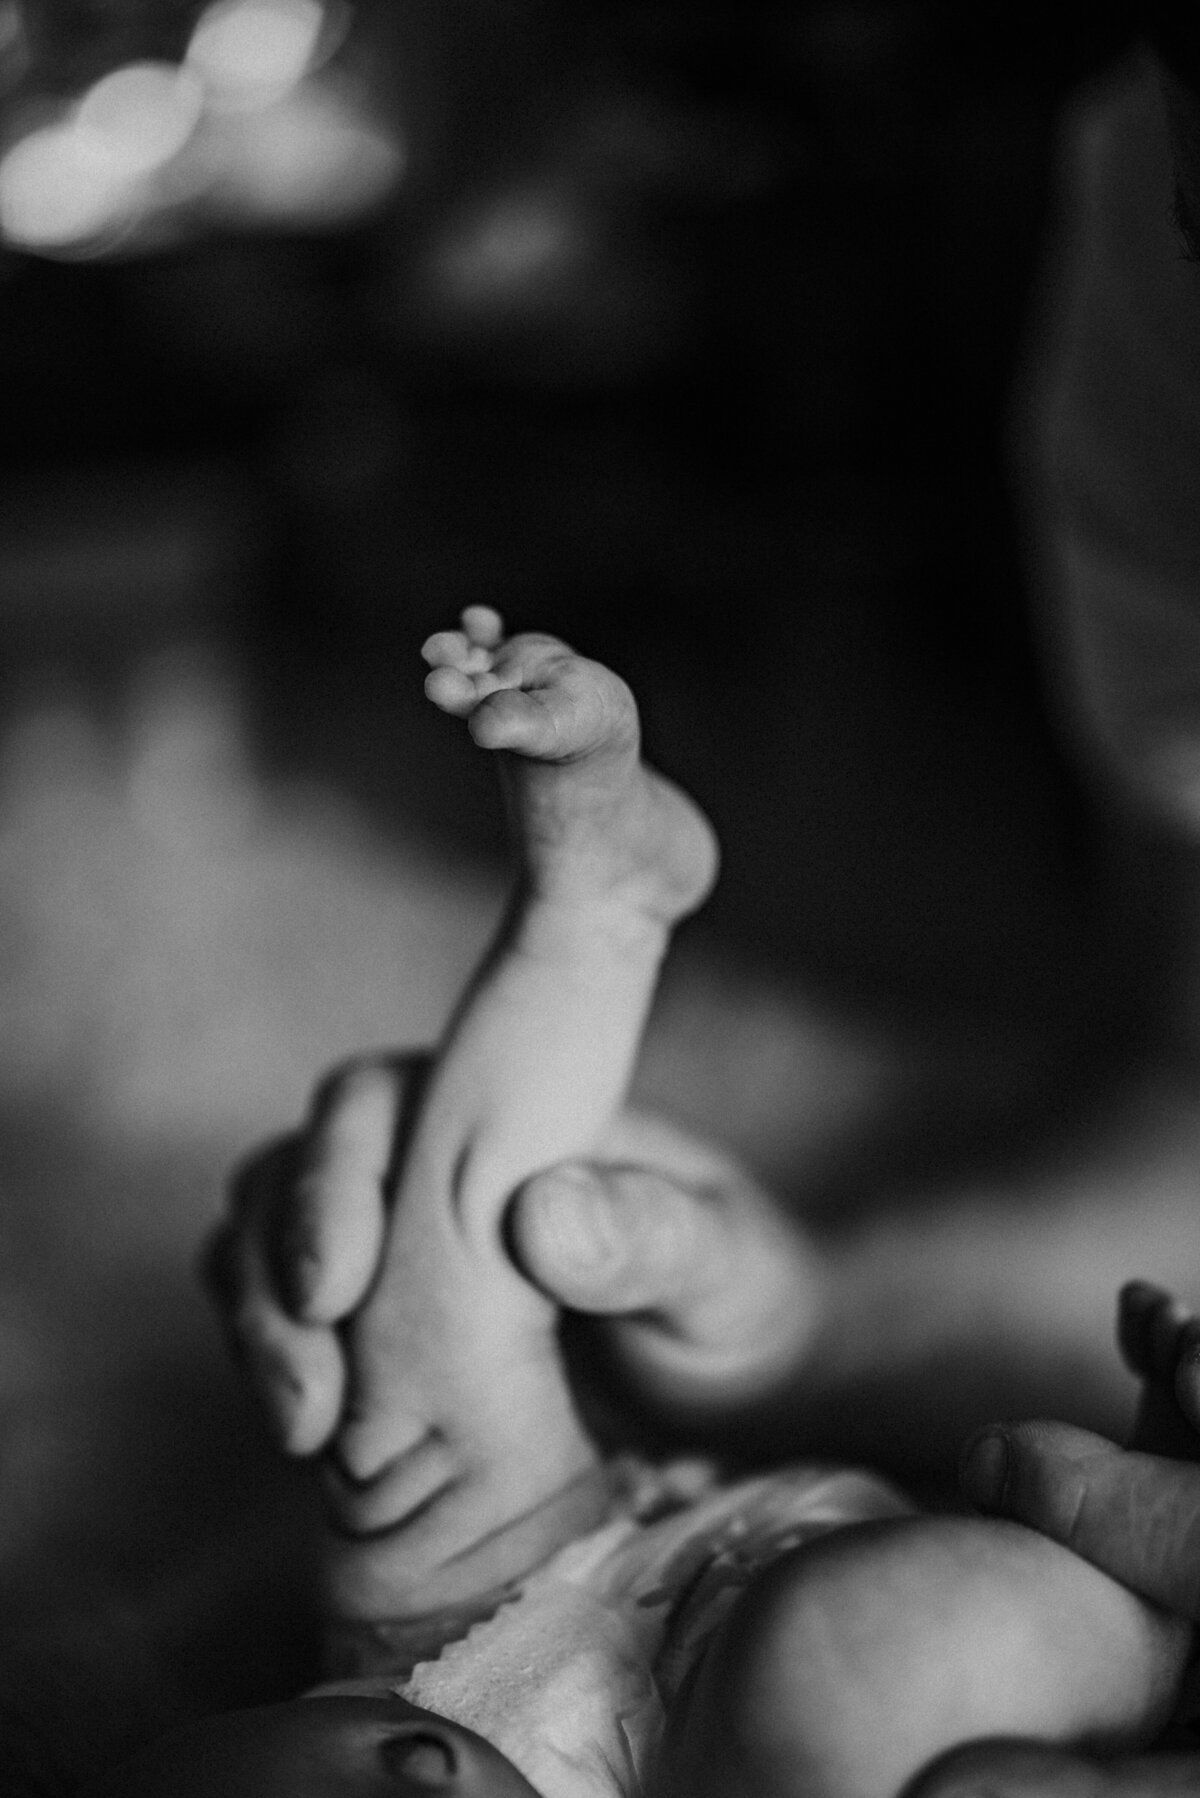 Newborn baby leg and foot being held up by dad